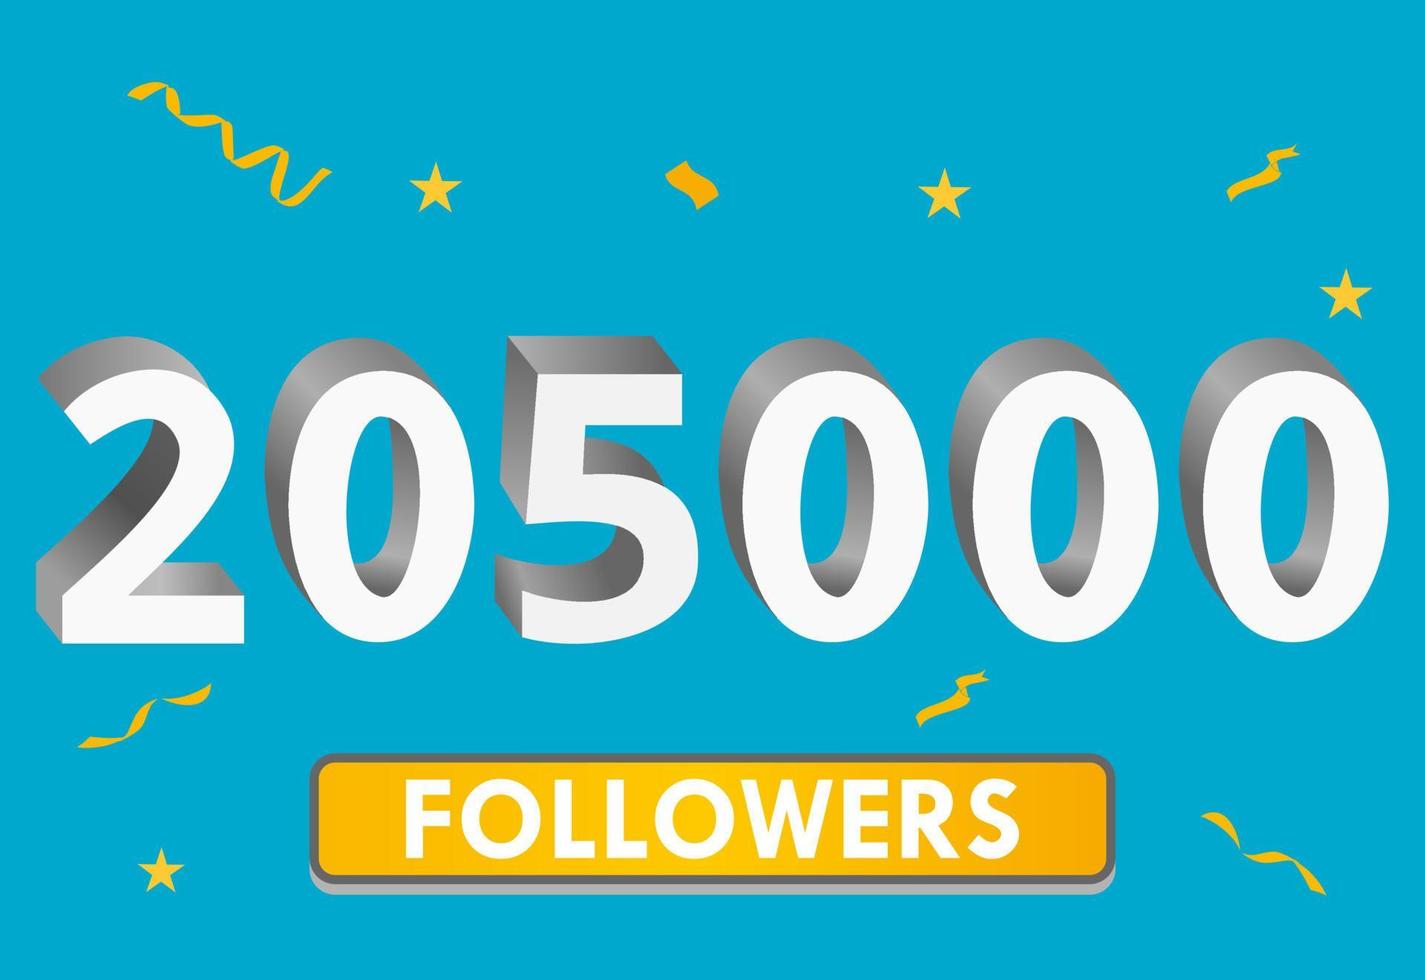 Illustration 3d numbers for social media 205k likes thanks, celebrating subscribers fans. Banner with 205000 followers vector